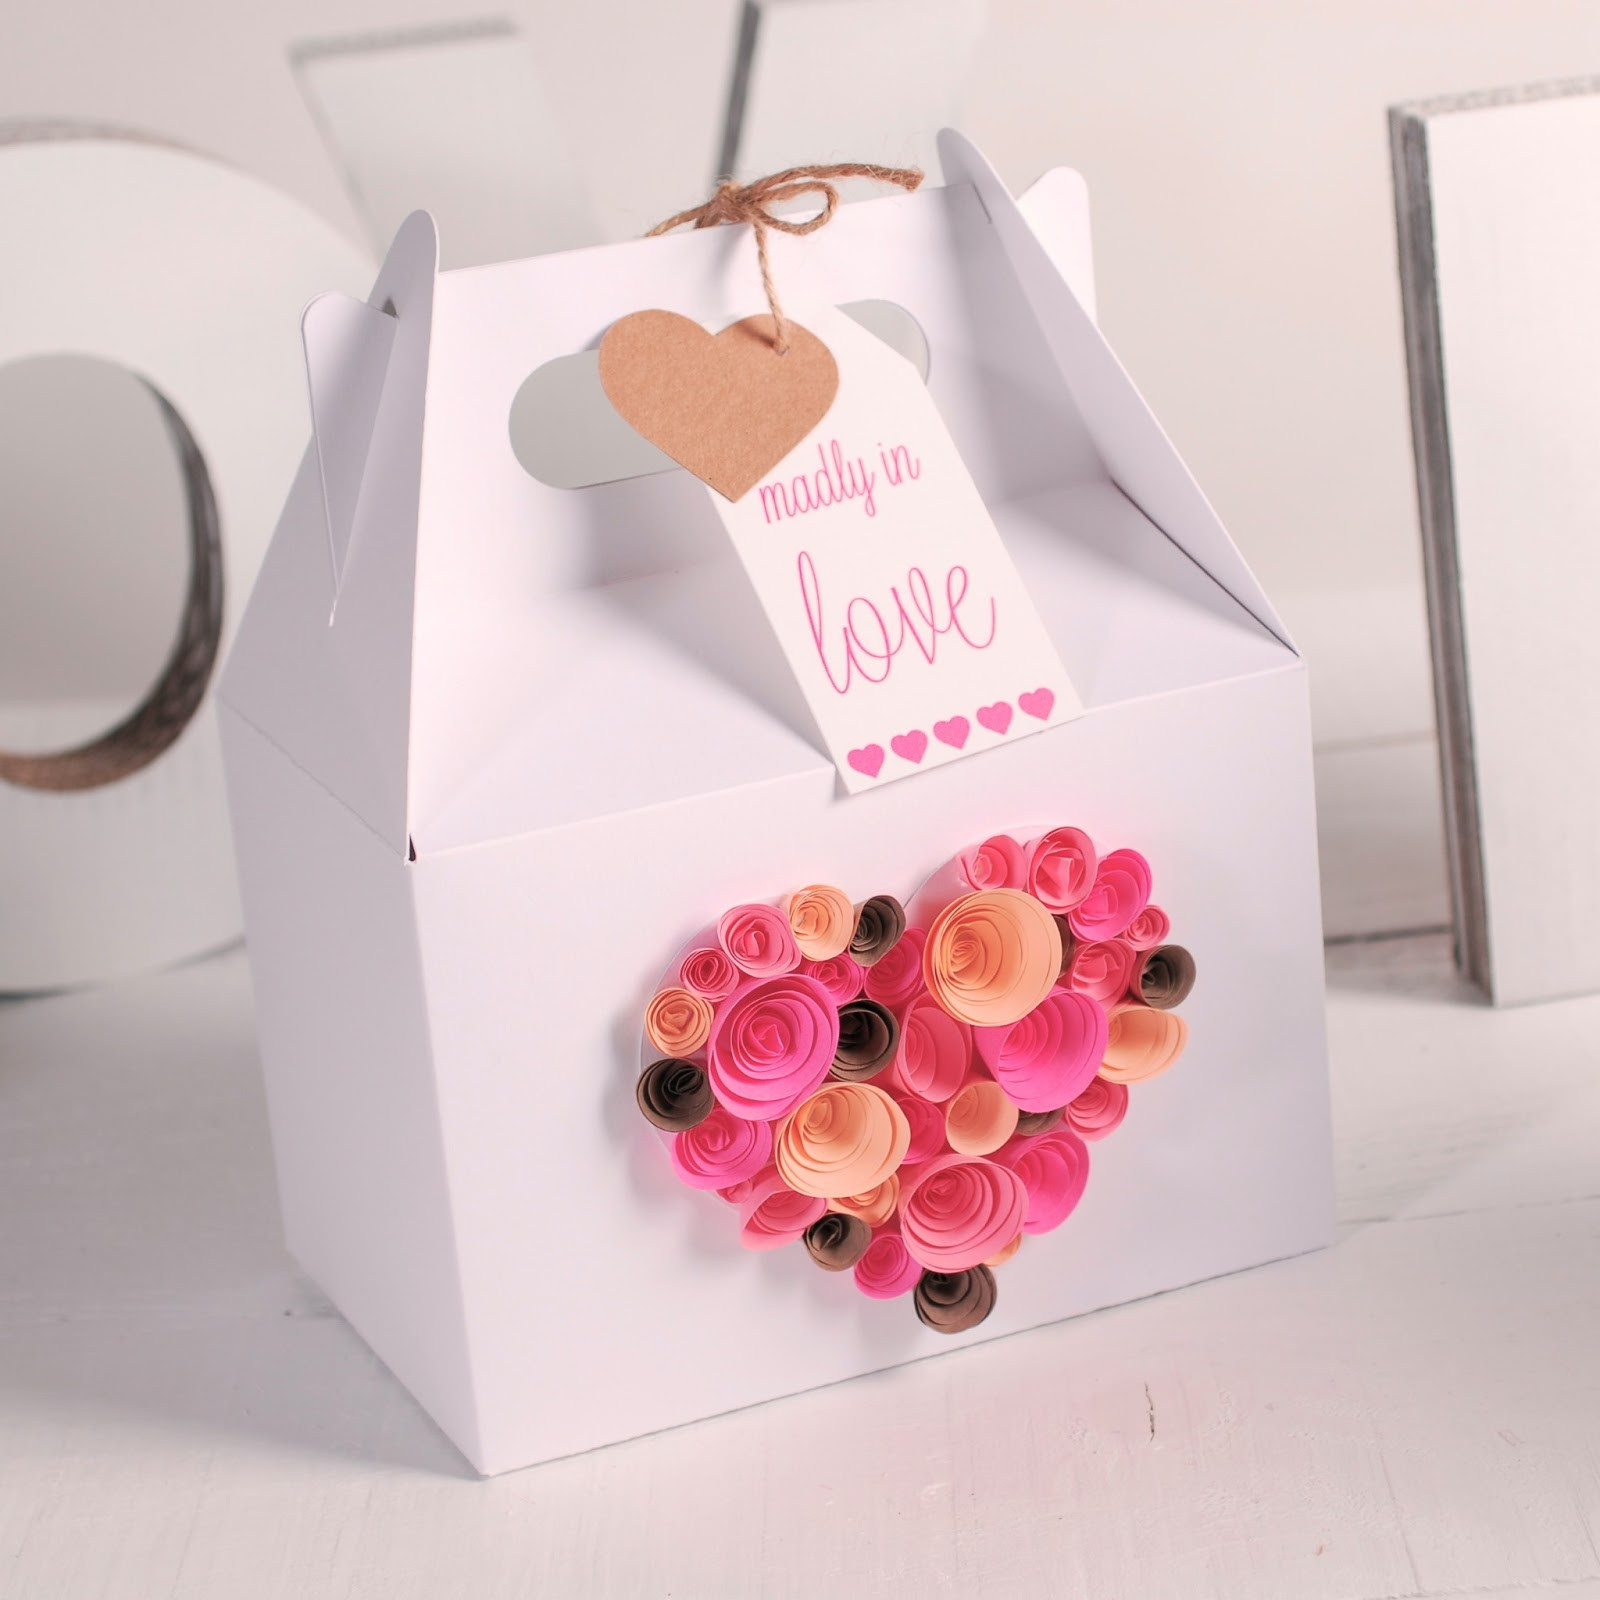 Valentines Gift Wrapping Ideas
 Gift wrapping ideas for Valentines Day How to decorate a